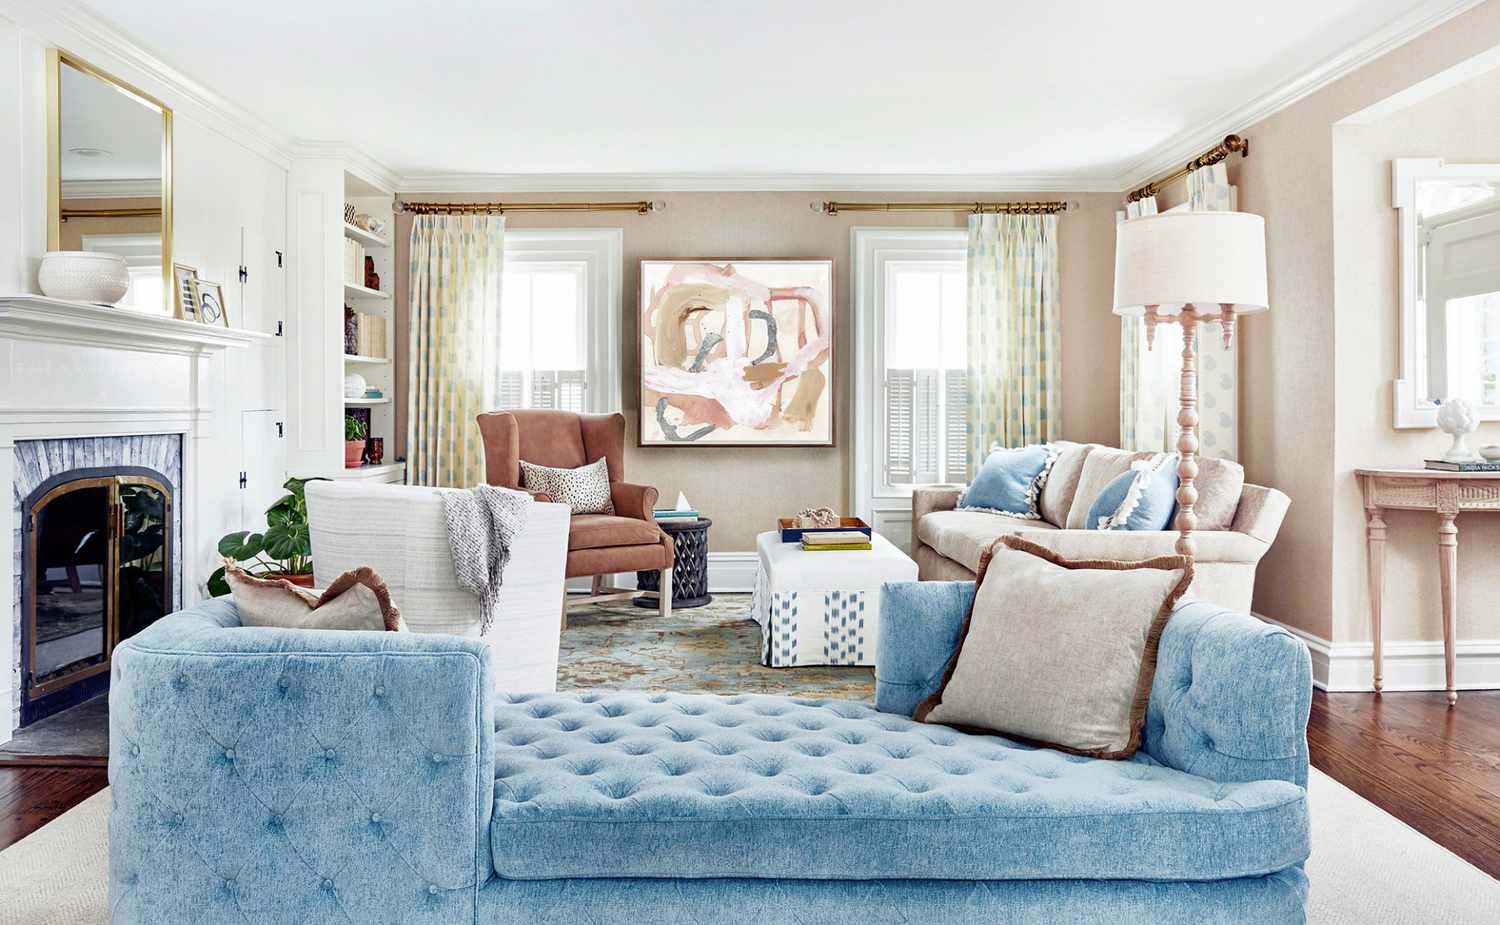 6 Tips When Decorating Your Main Living Room